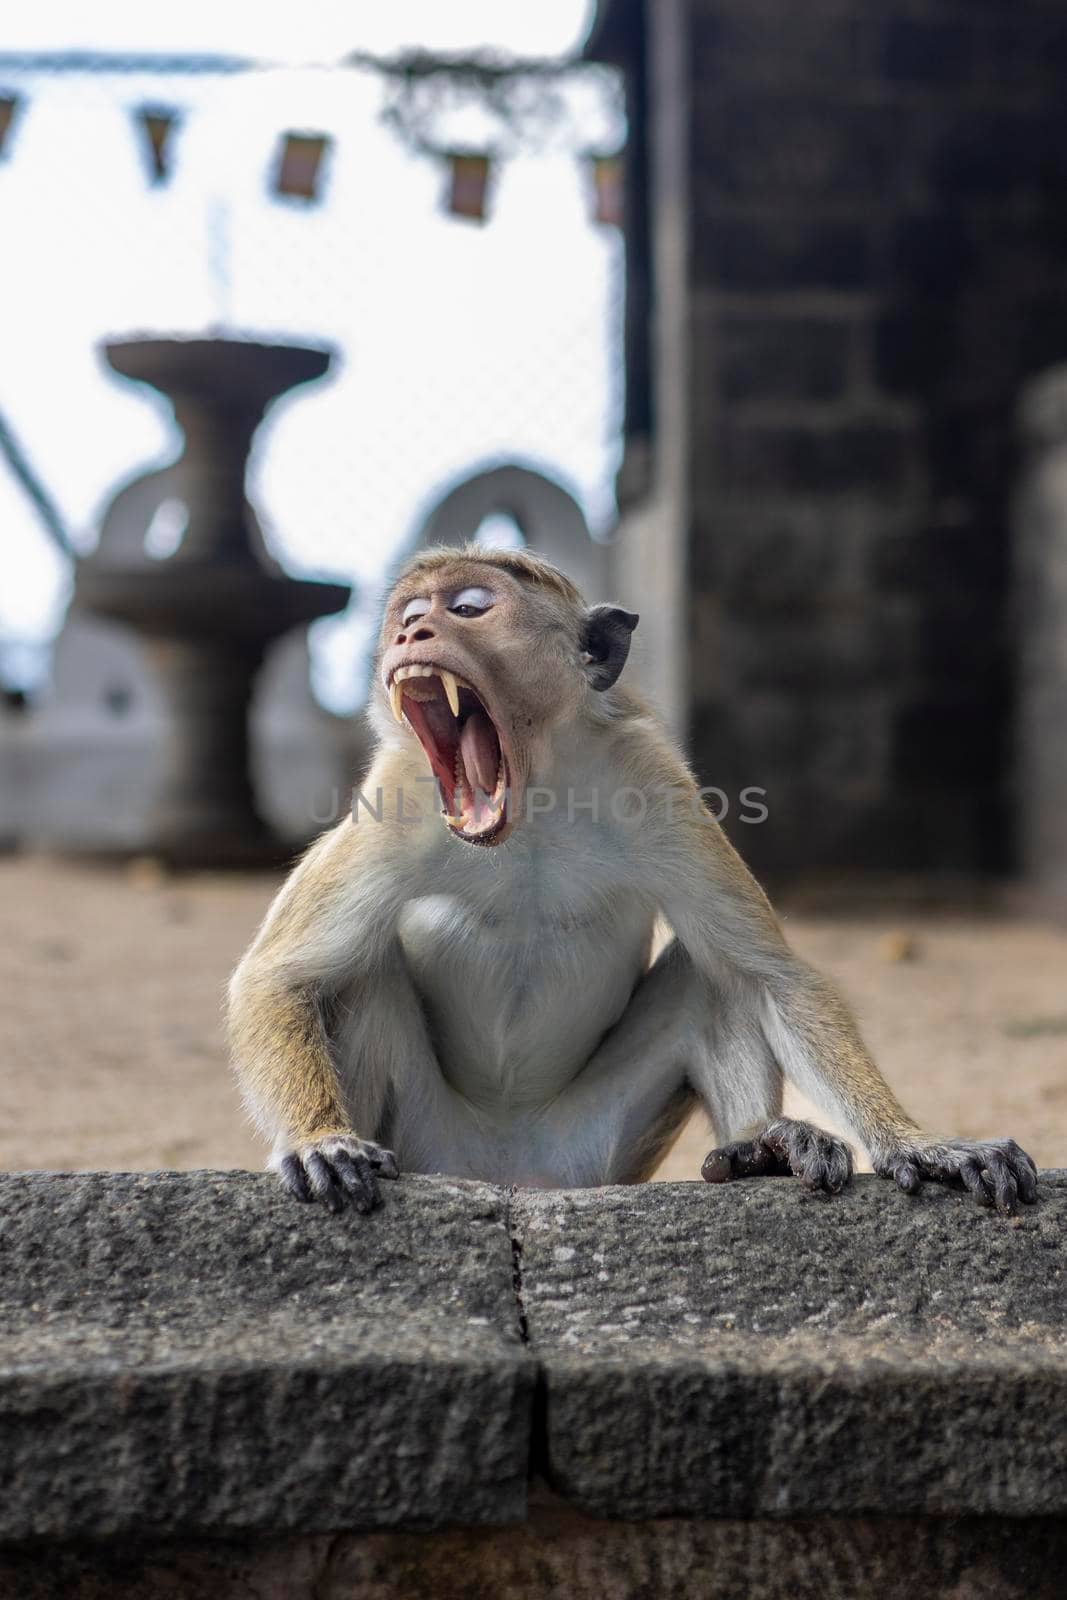 Sri Lanka. A cute monkey sits with his mouth open and shows his fangs. In an old Buddhist temple. High quality photo